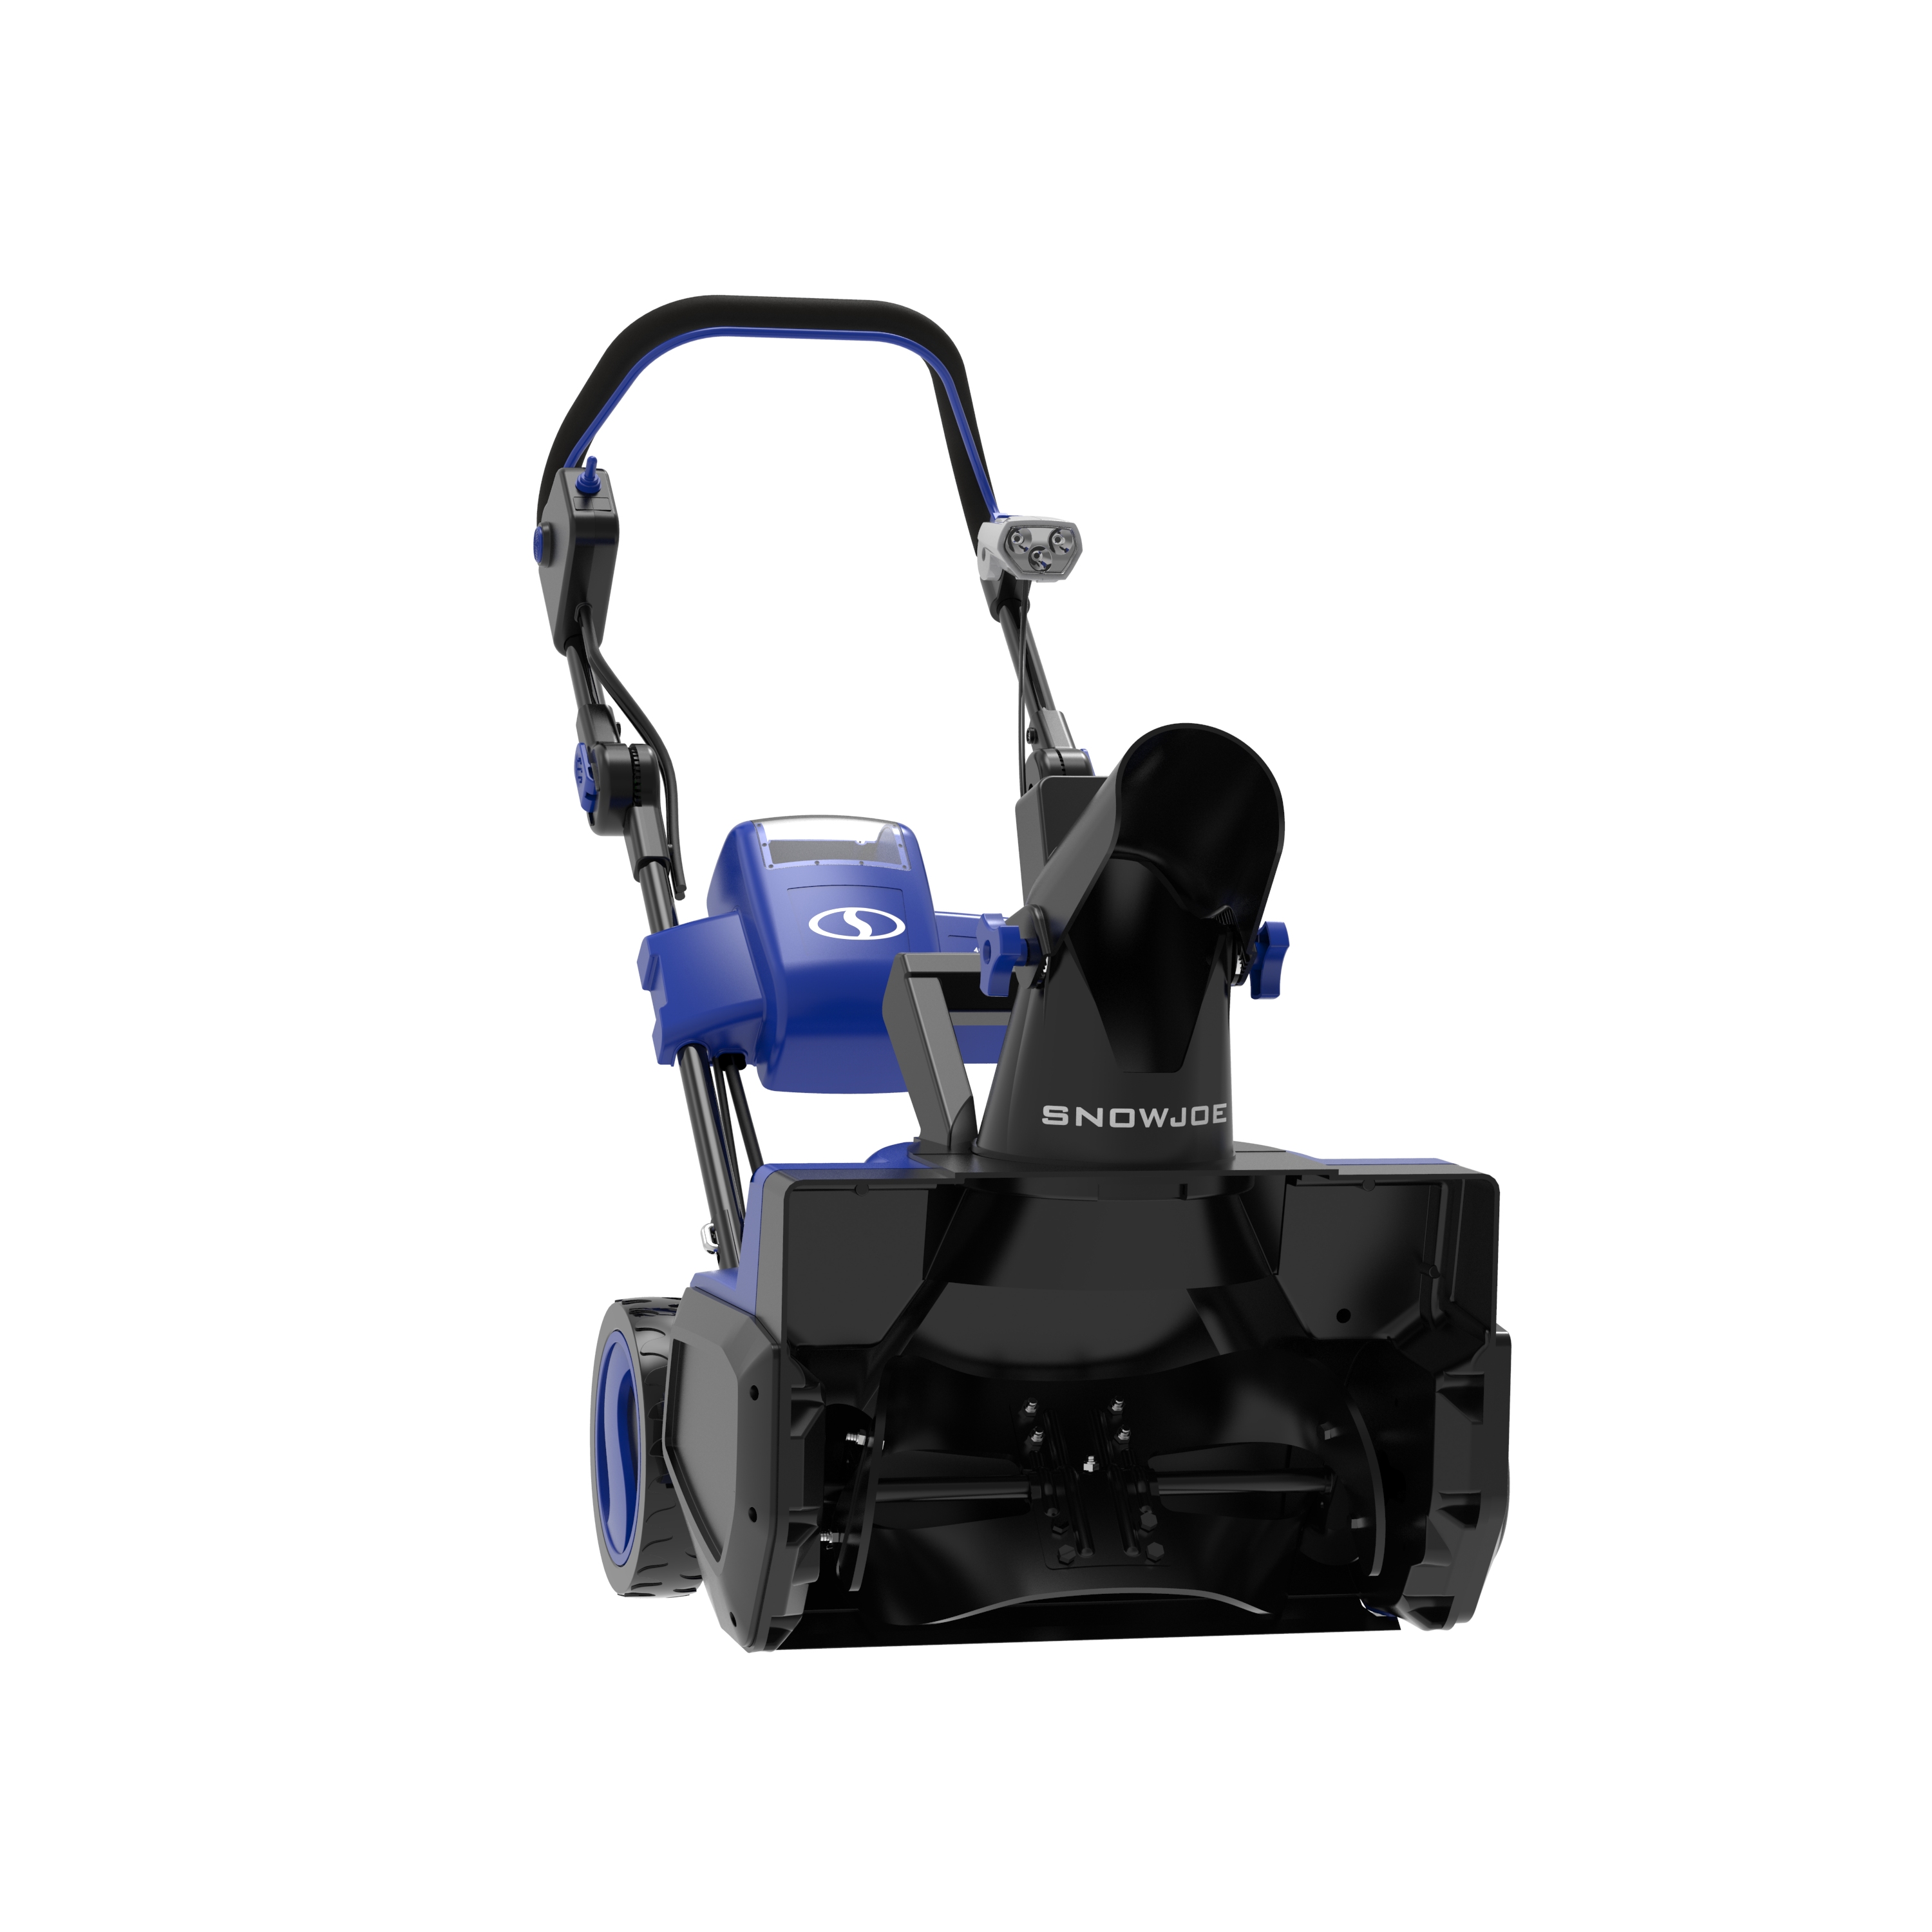 Snow Joe iON18SB-PRO-RM Cordless Single Stage Snow Blower 18-Inch Brushless 5 Ah Battery Certified Refurbished 